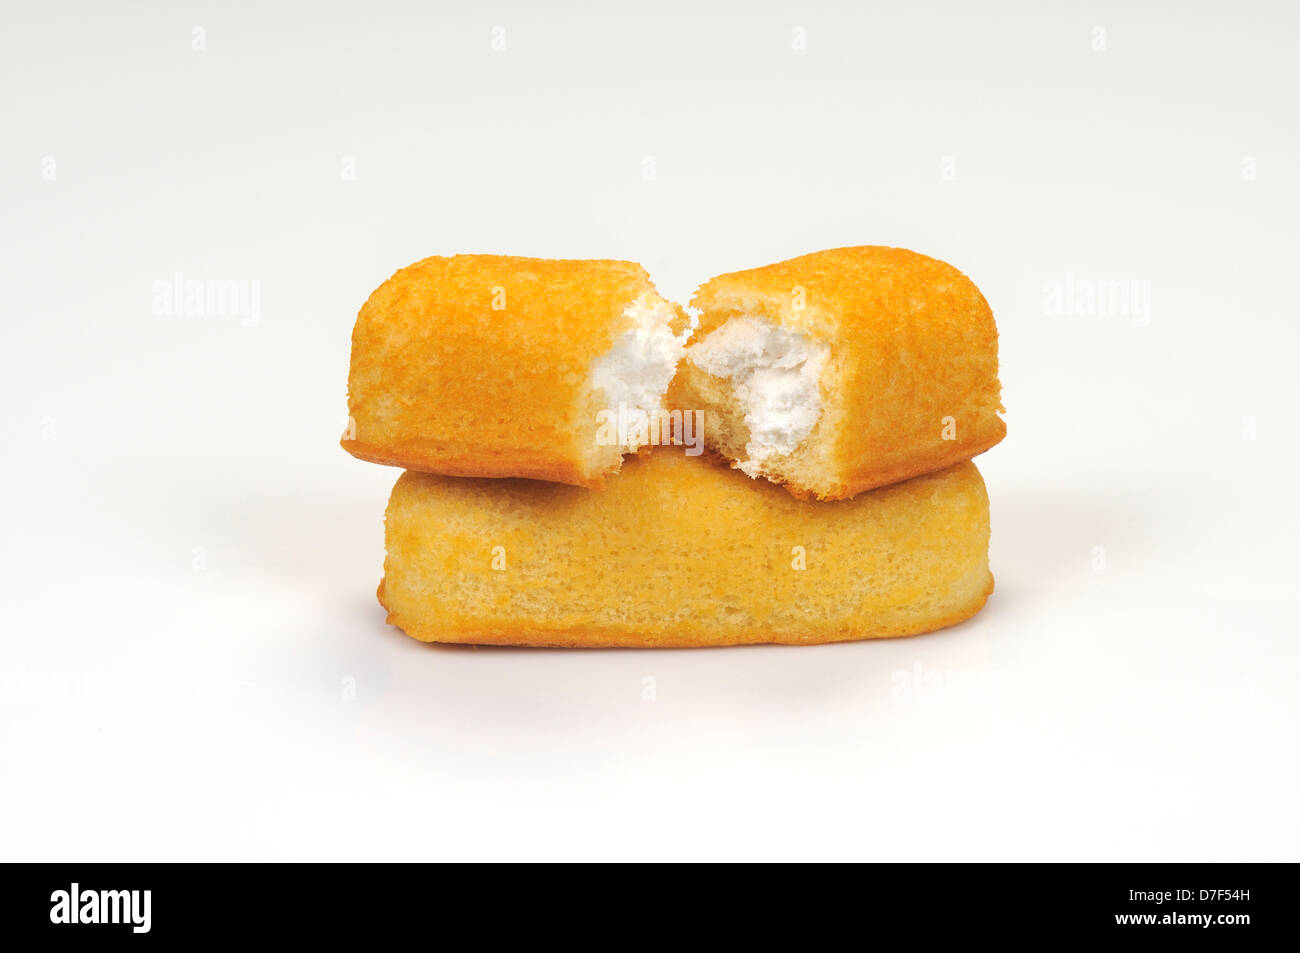 Hostess Twinkies on top of each other with 1 cut in half and creme filling visible on white backgound, cutout. USA Stock Photo